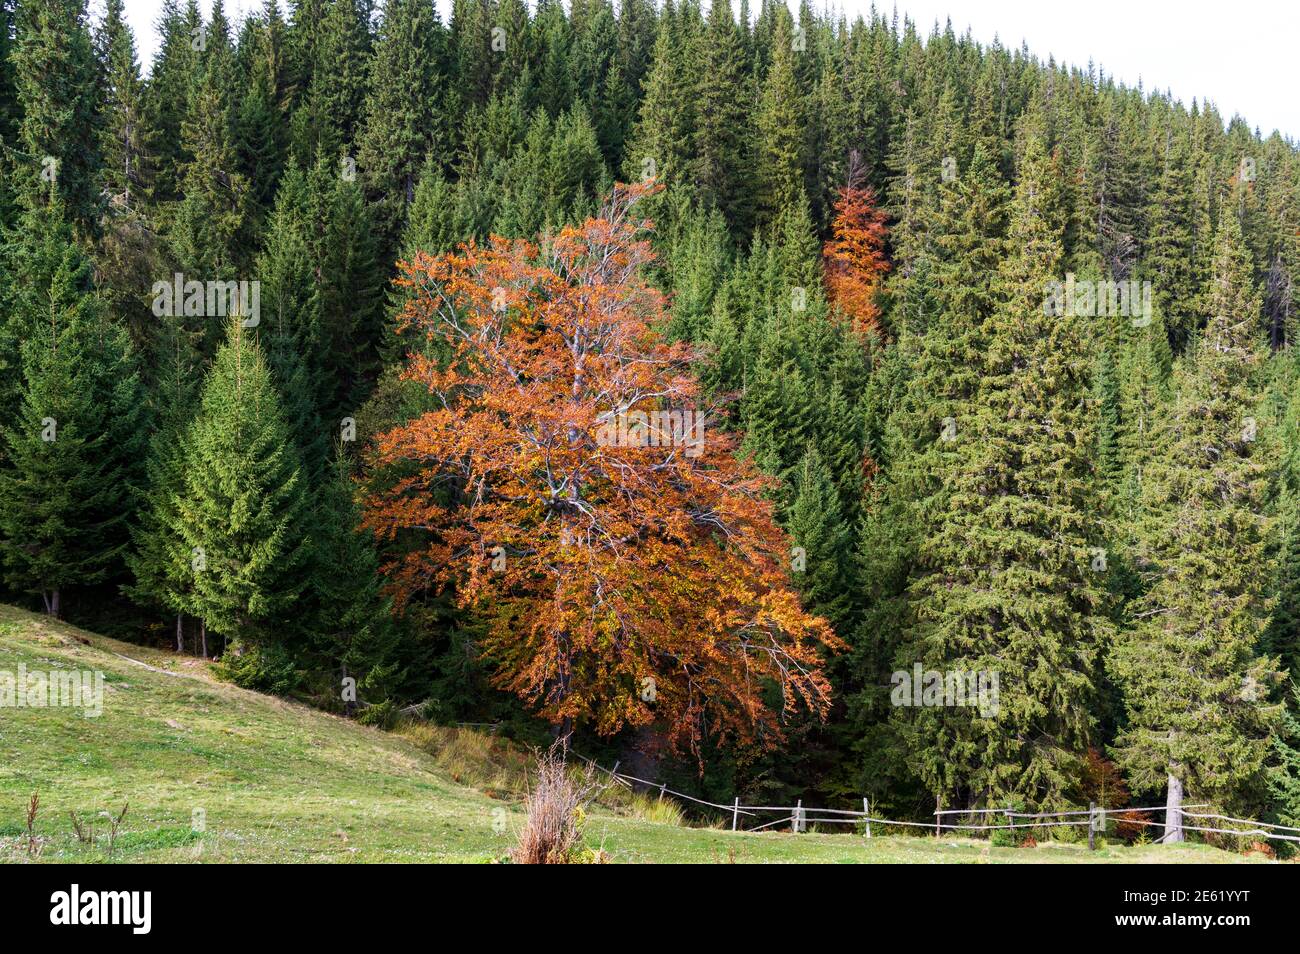 A beautiful lush tree with yellow leaves. Deciduous tree among the needles. Unique tree. Stock Photo